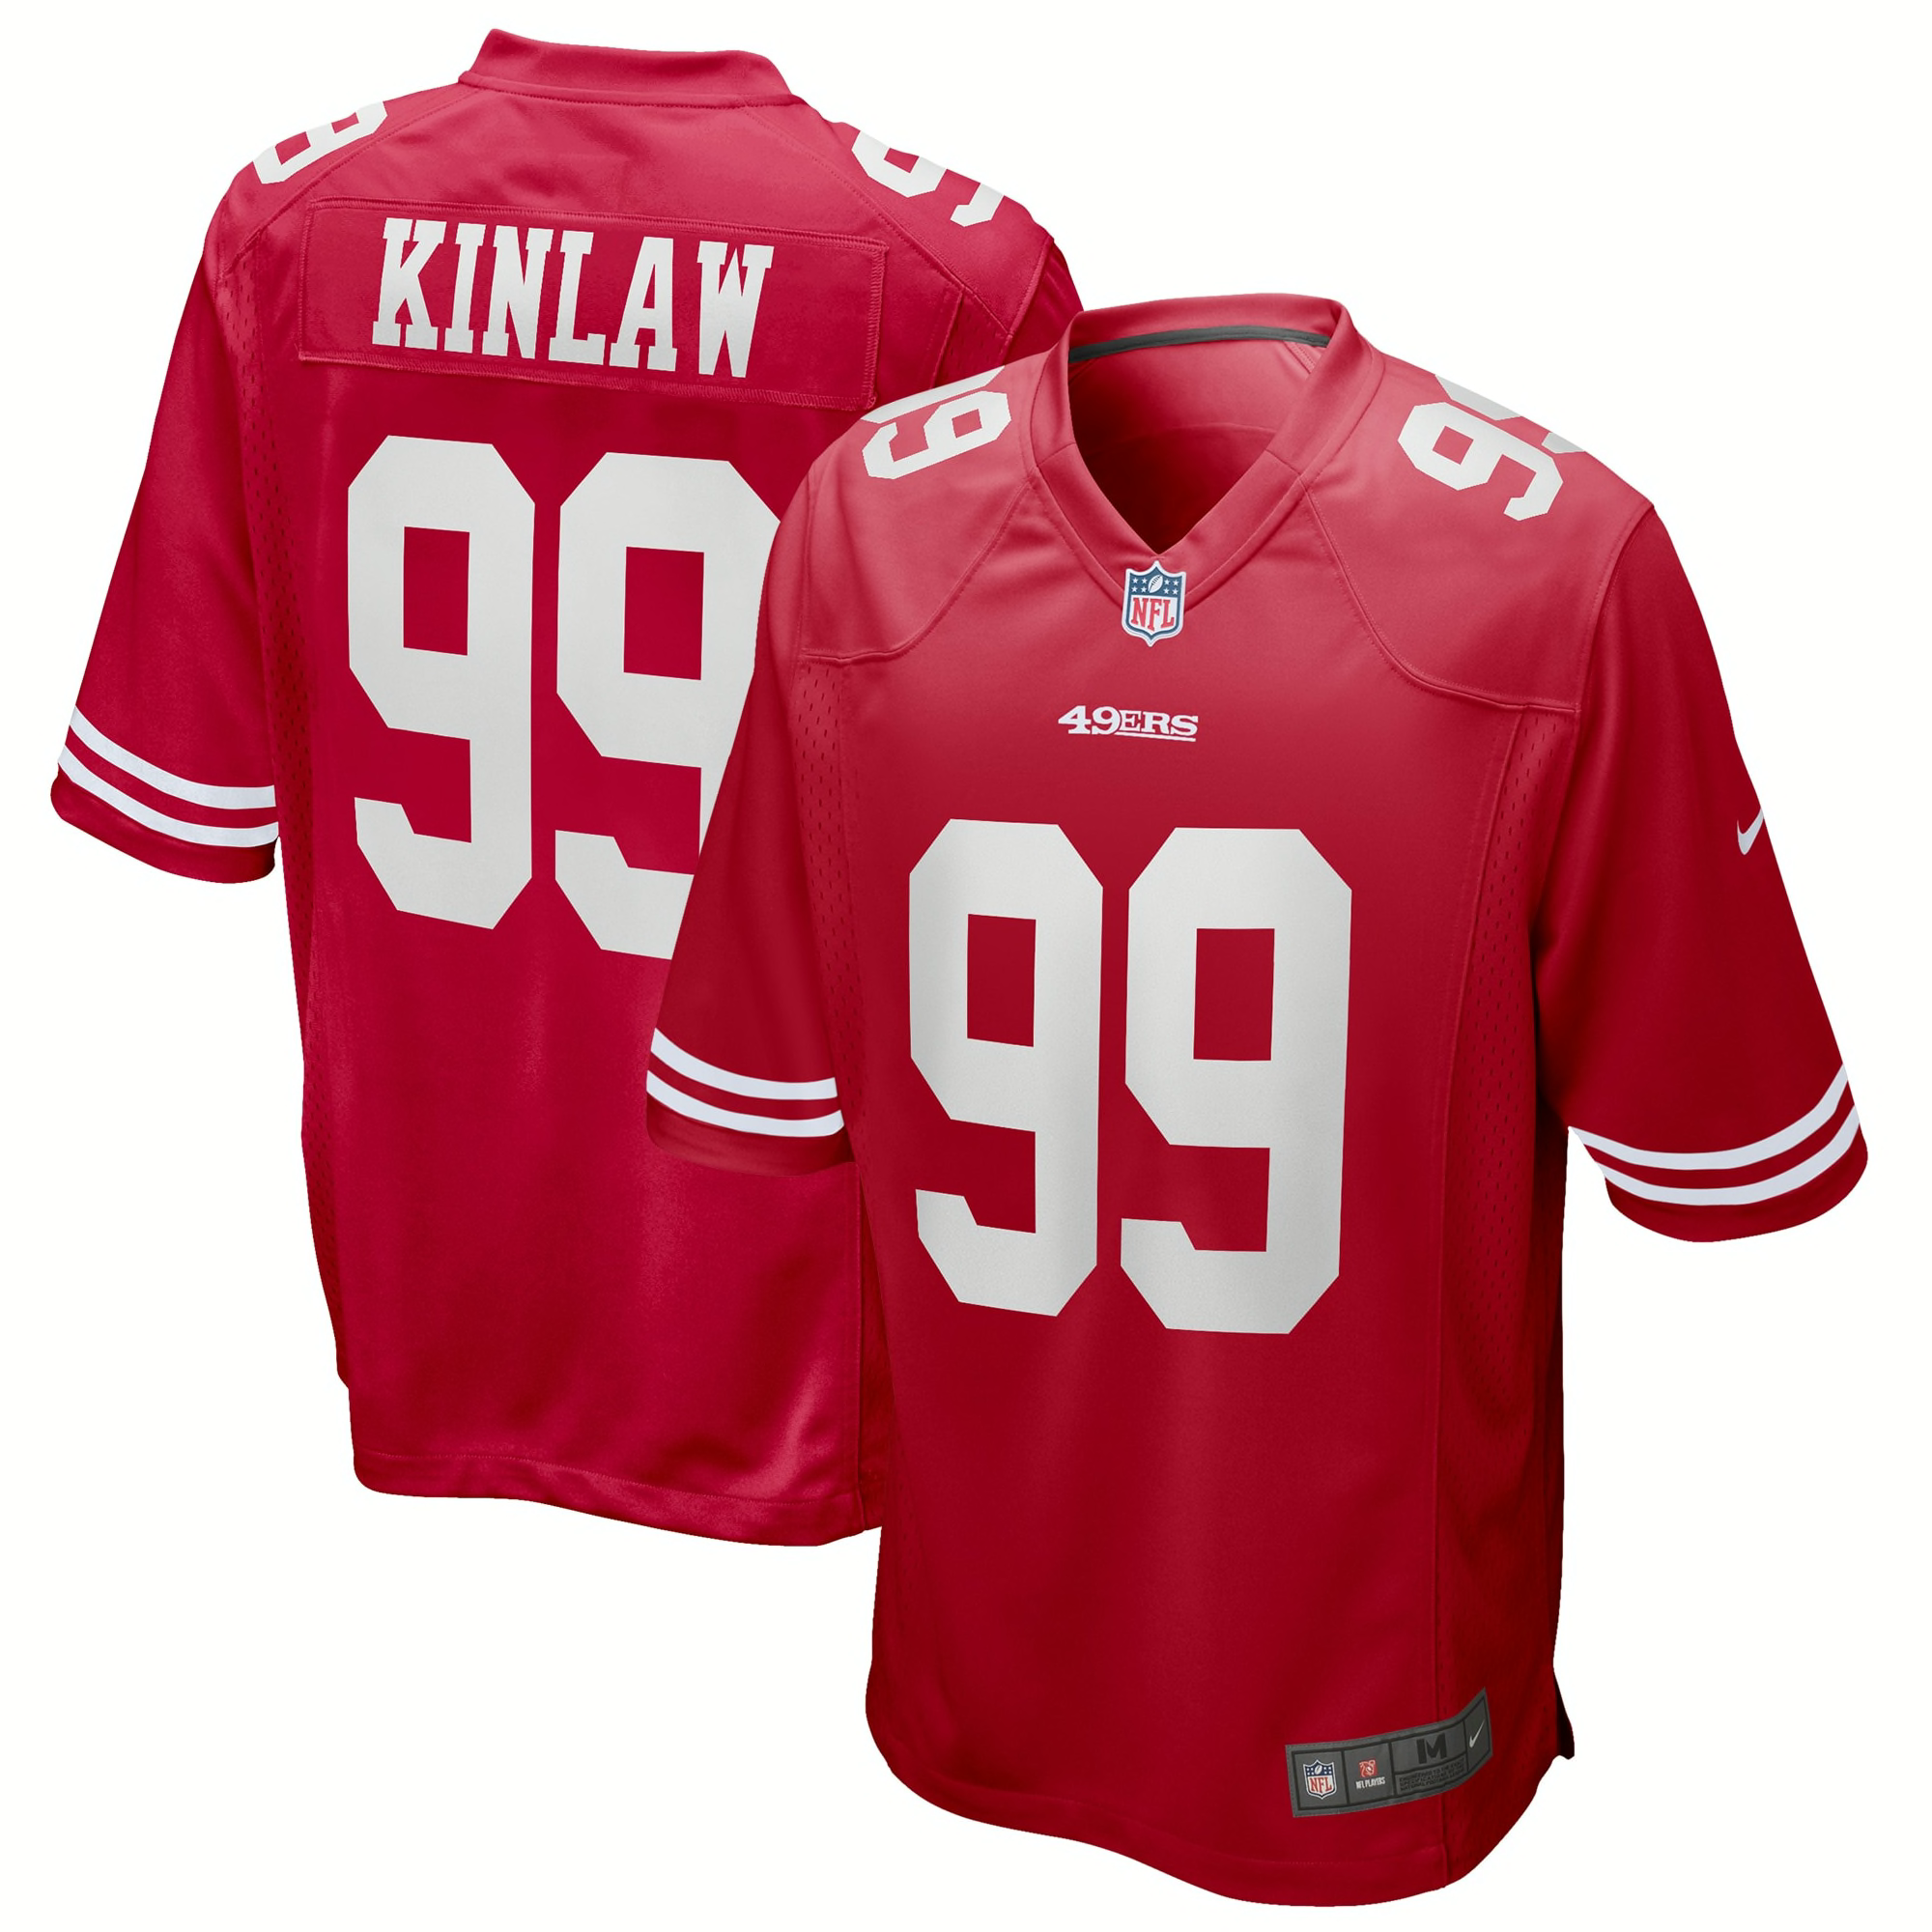 49ers new jersey 2020